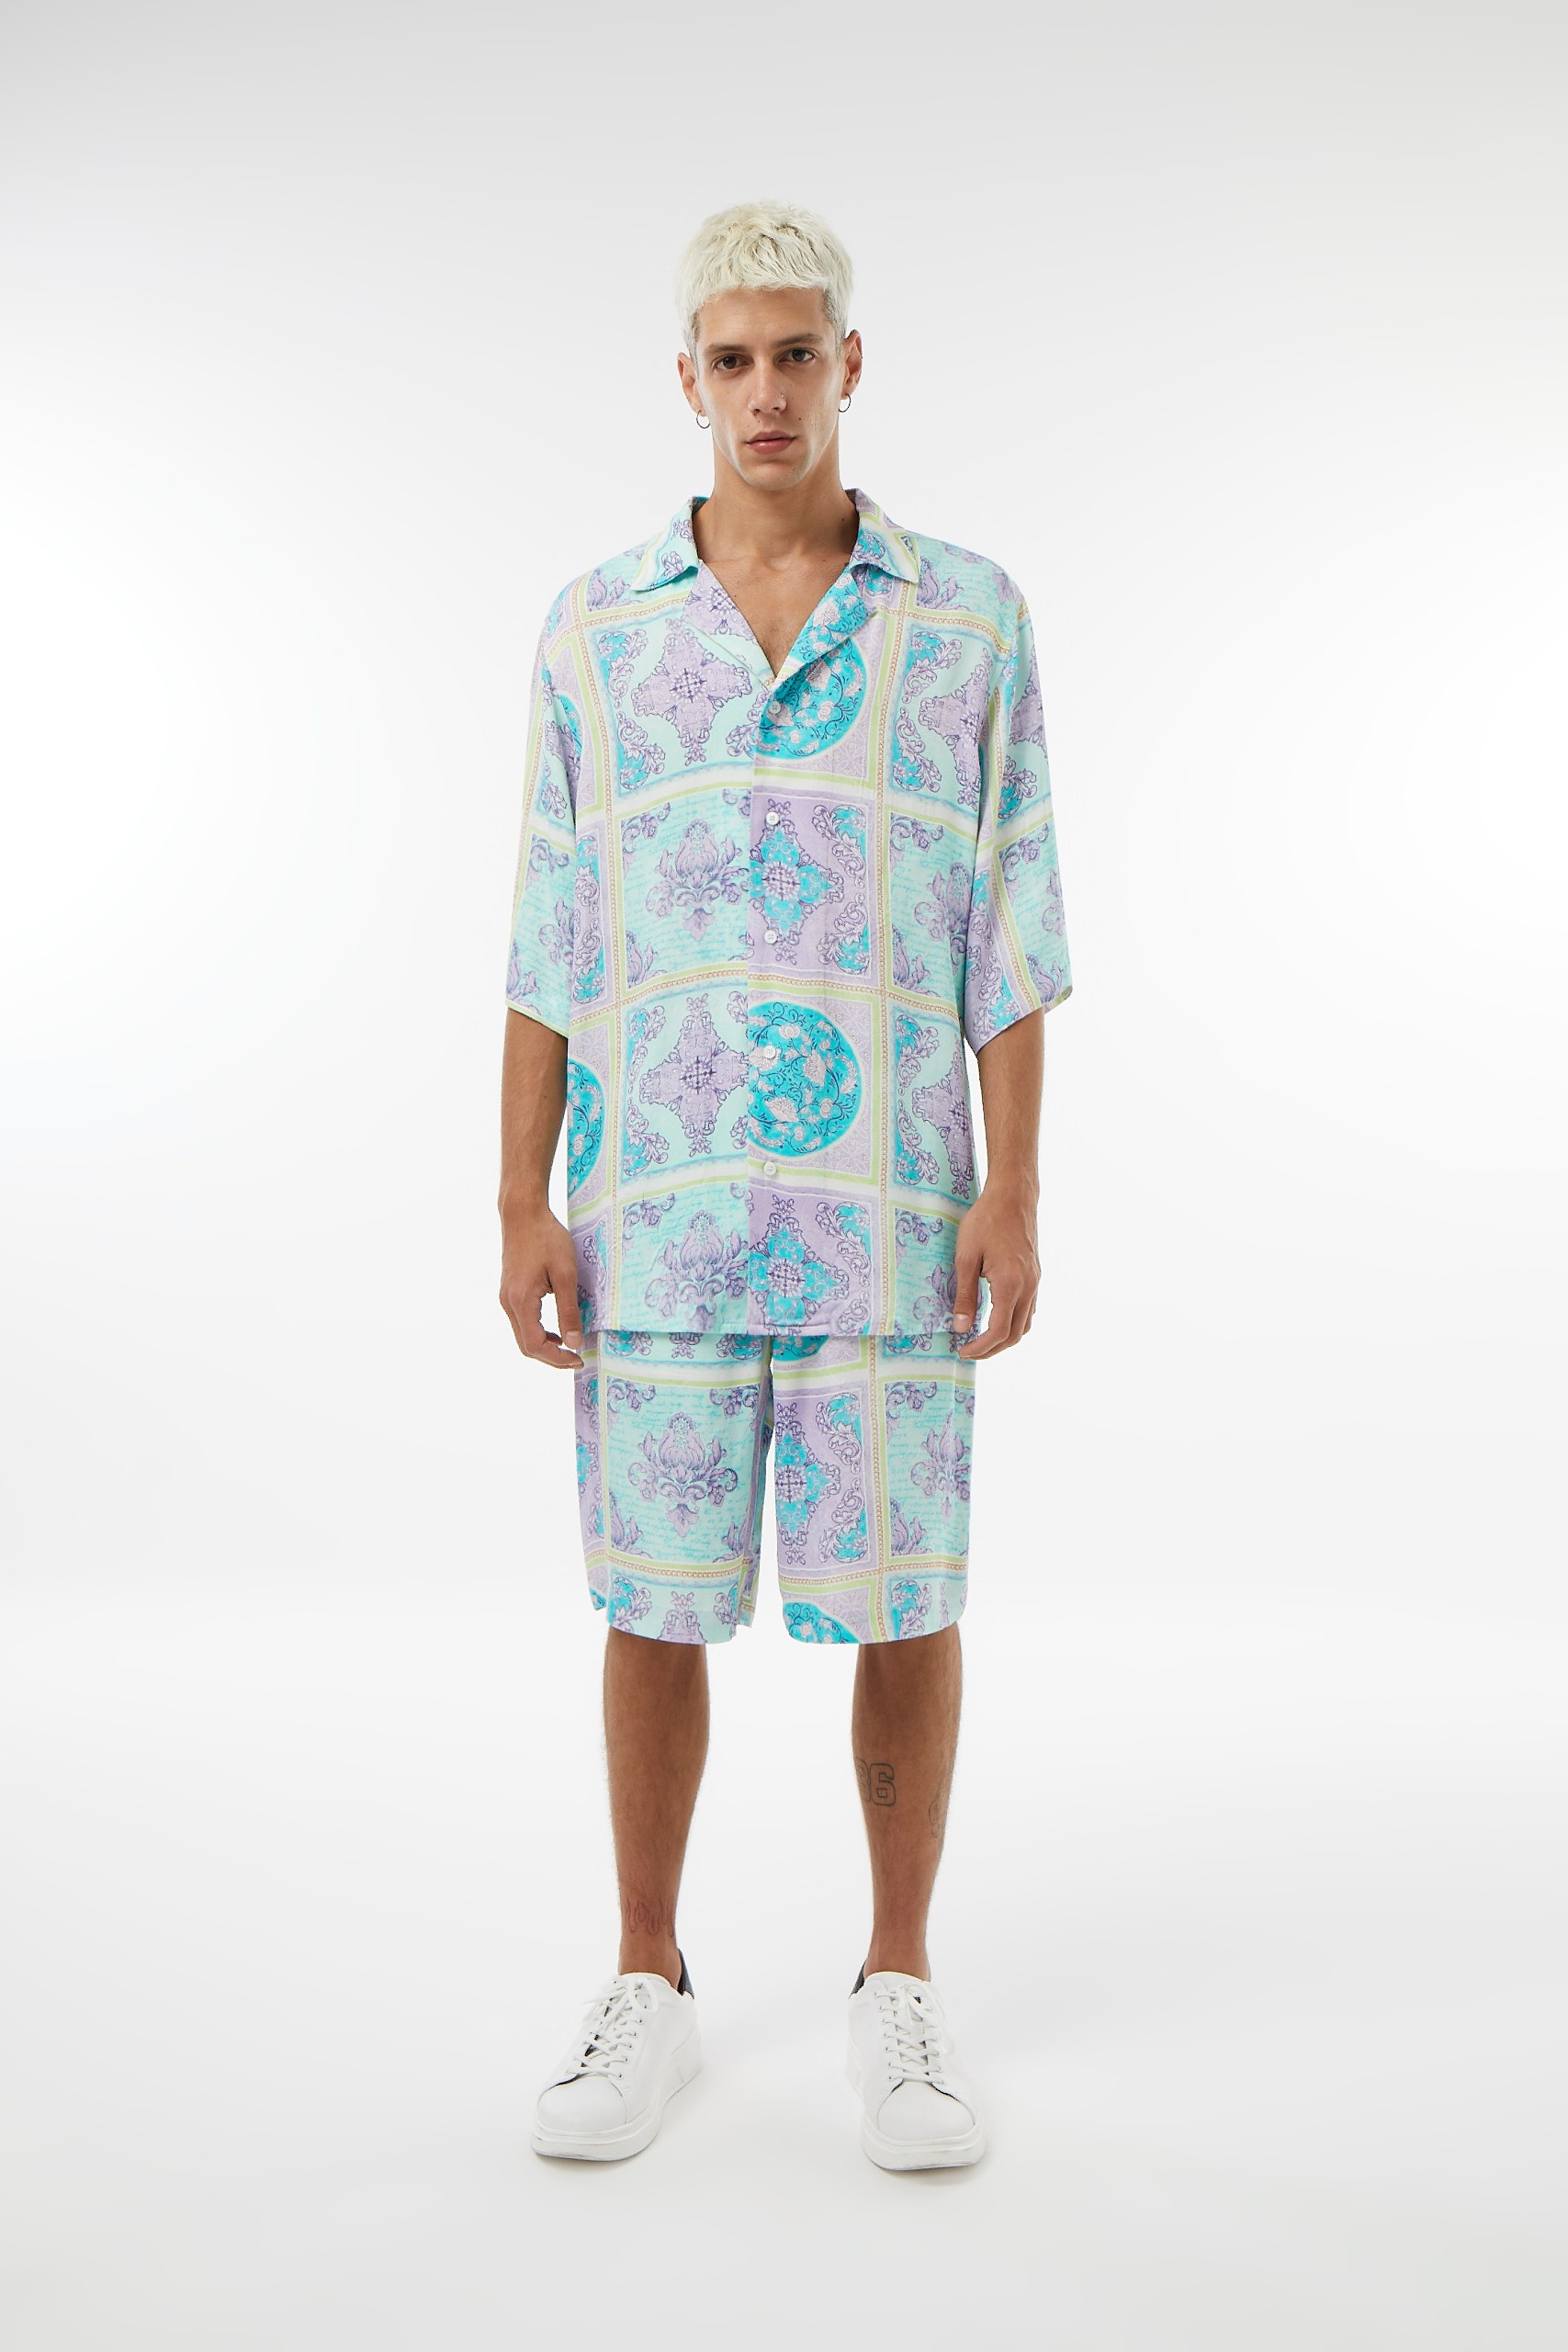 Drop #M004 Sateen Shirt - Patterned Turquoise